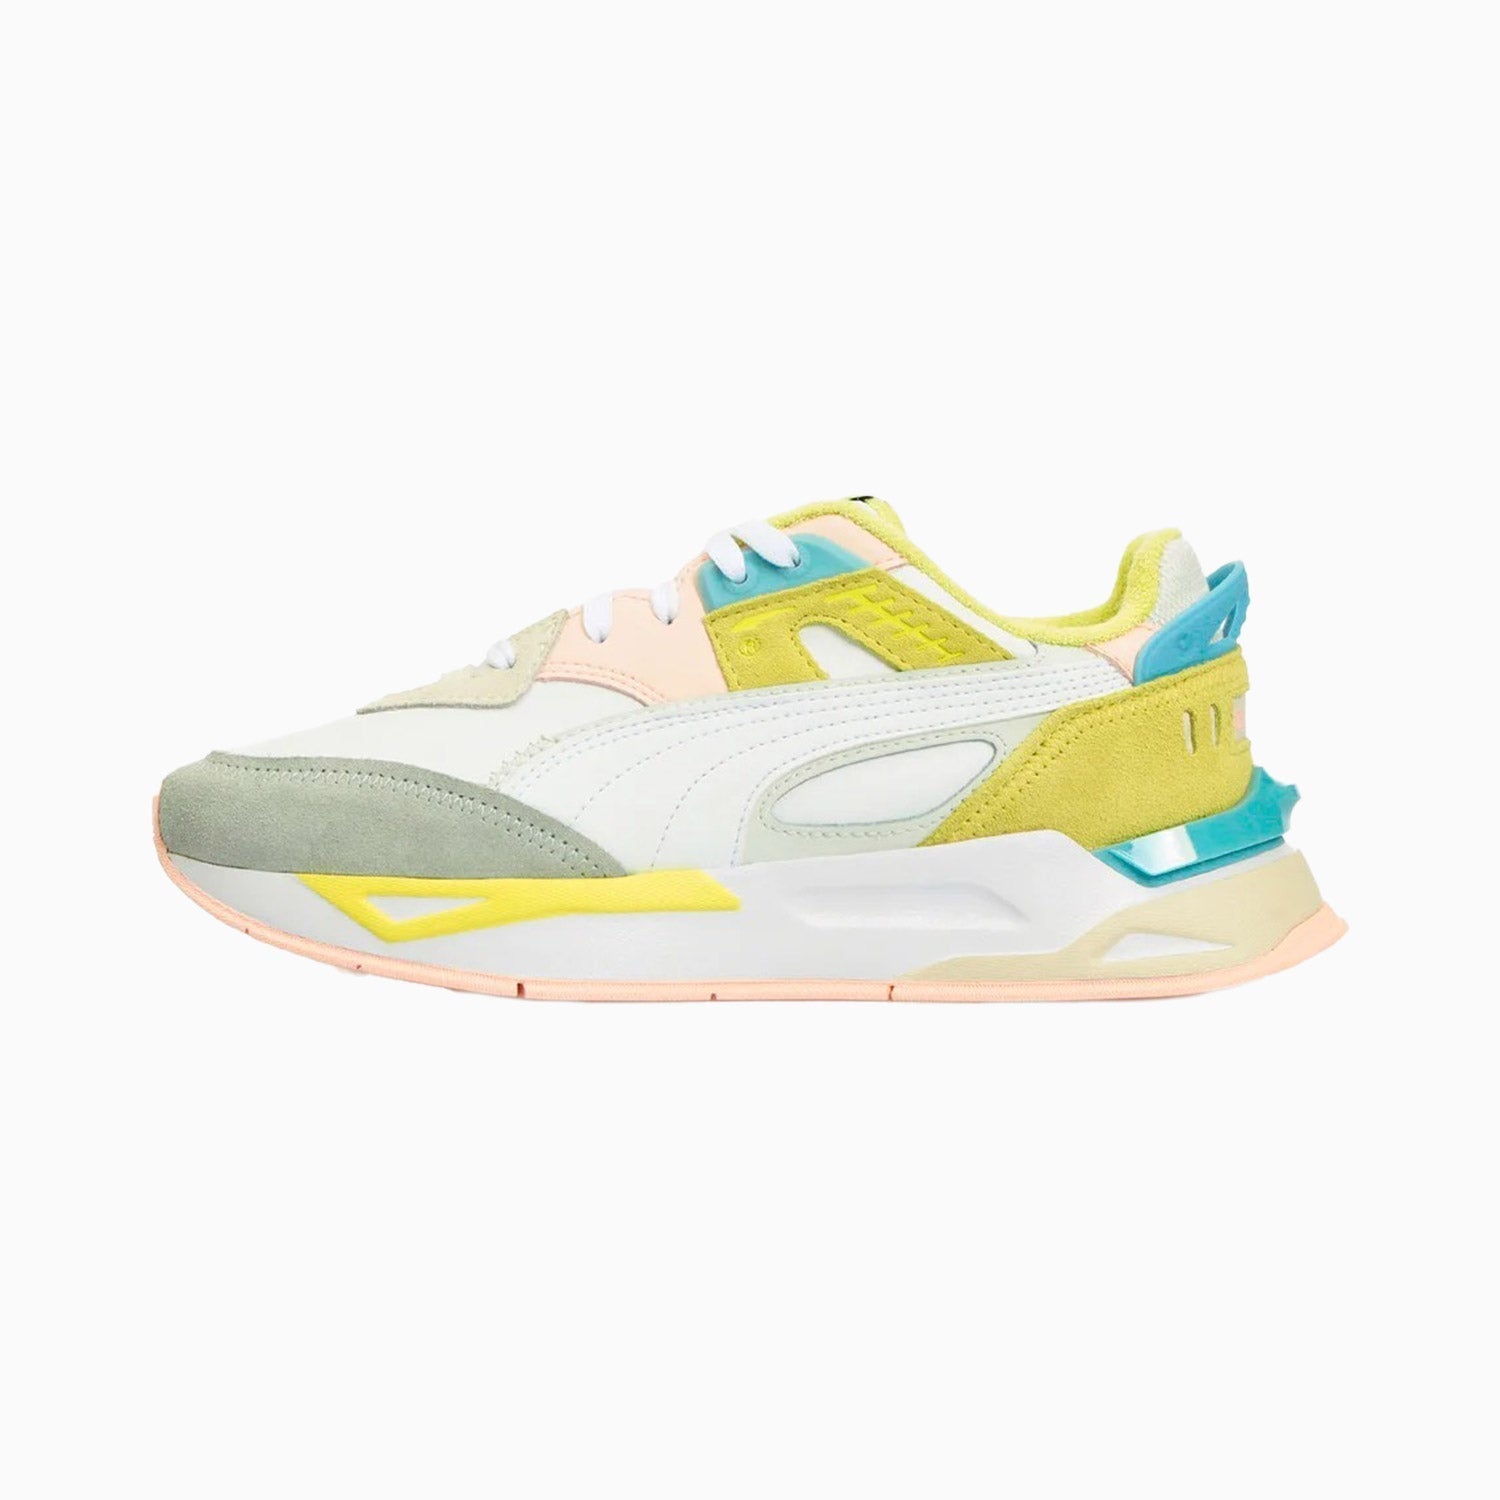 Puma Women's Mirage Sport Pastel Trainer Shoes - Color: White lotus - Tops and Bottoms USA -